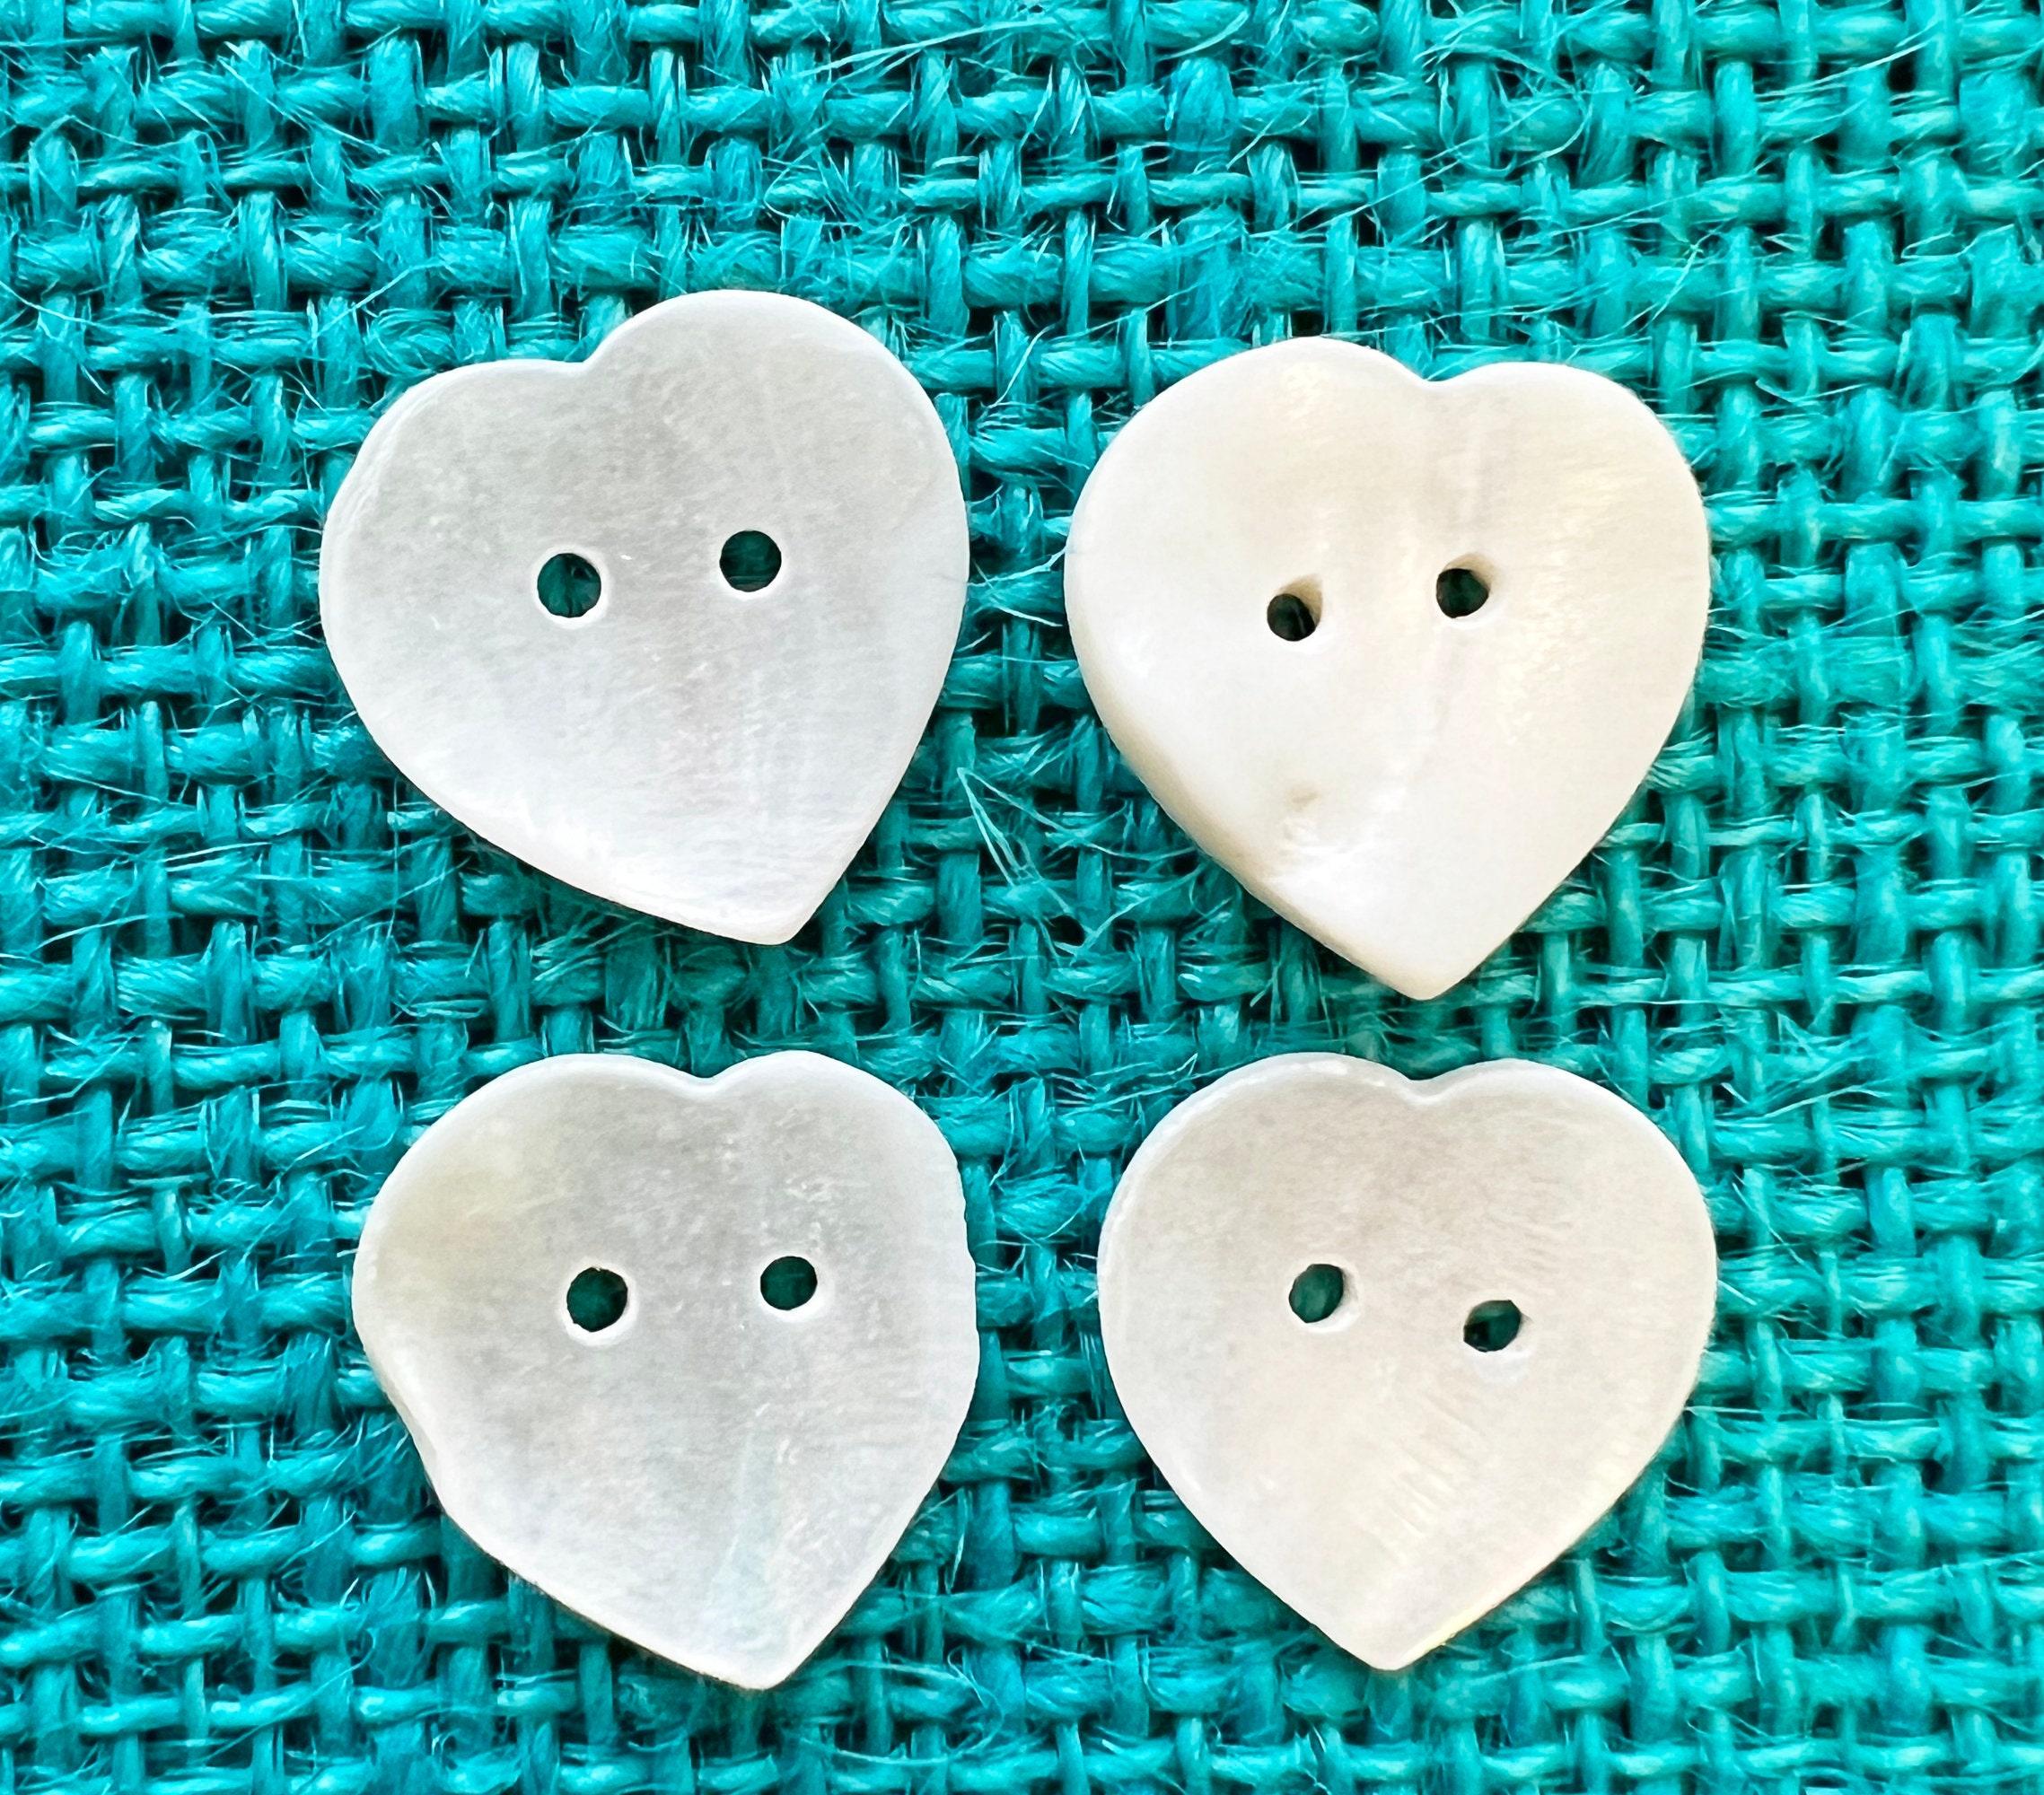  EXCEART 400 Pcs Wood Heart Buttons Heart Embellishment Wooden  Flatback Buttons Small Wood Heart Cutouts Heart Buttons for Crafts Heart  Slices Heart Buttons Wood Confetti Bamboo Manual